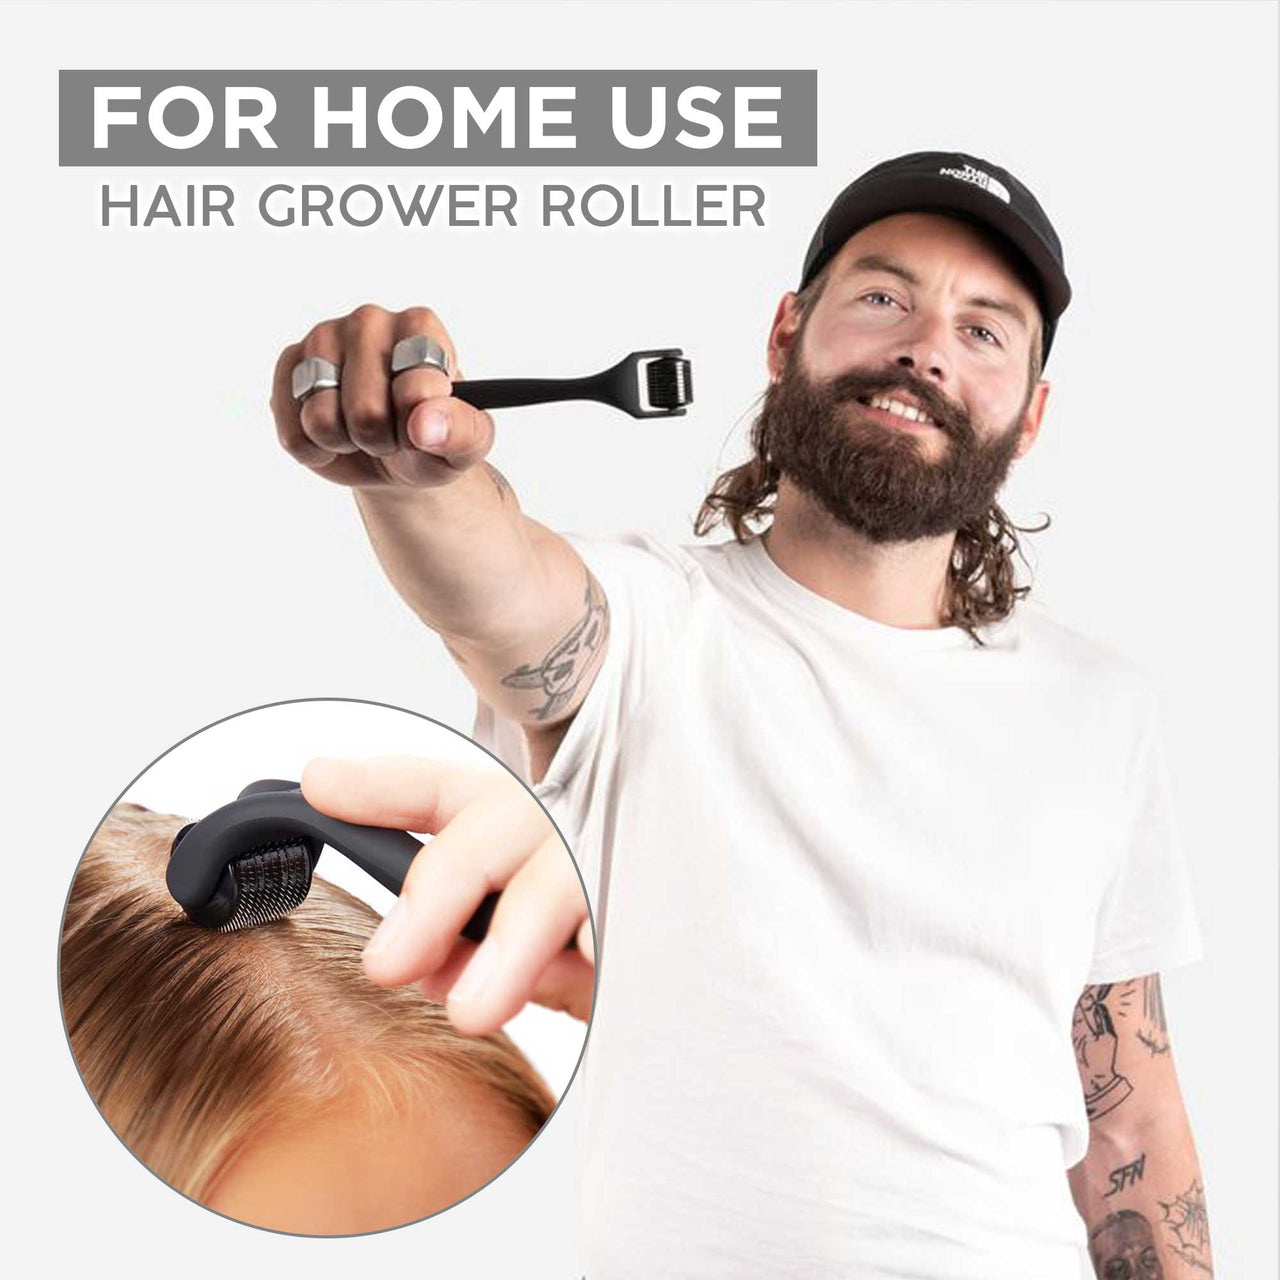 Hair Re-Activating Roller - thedealzninja